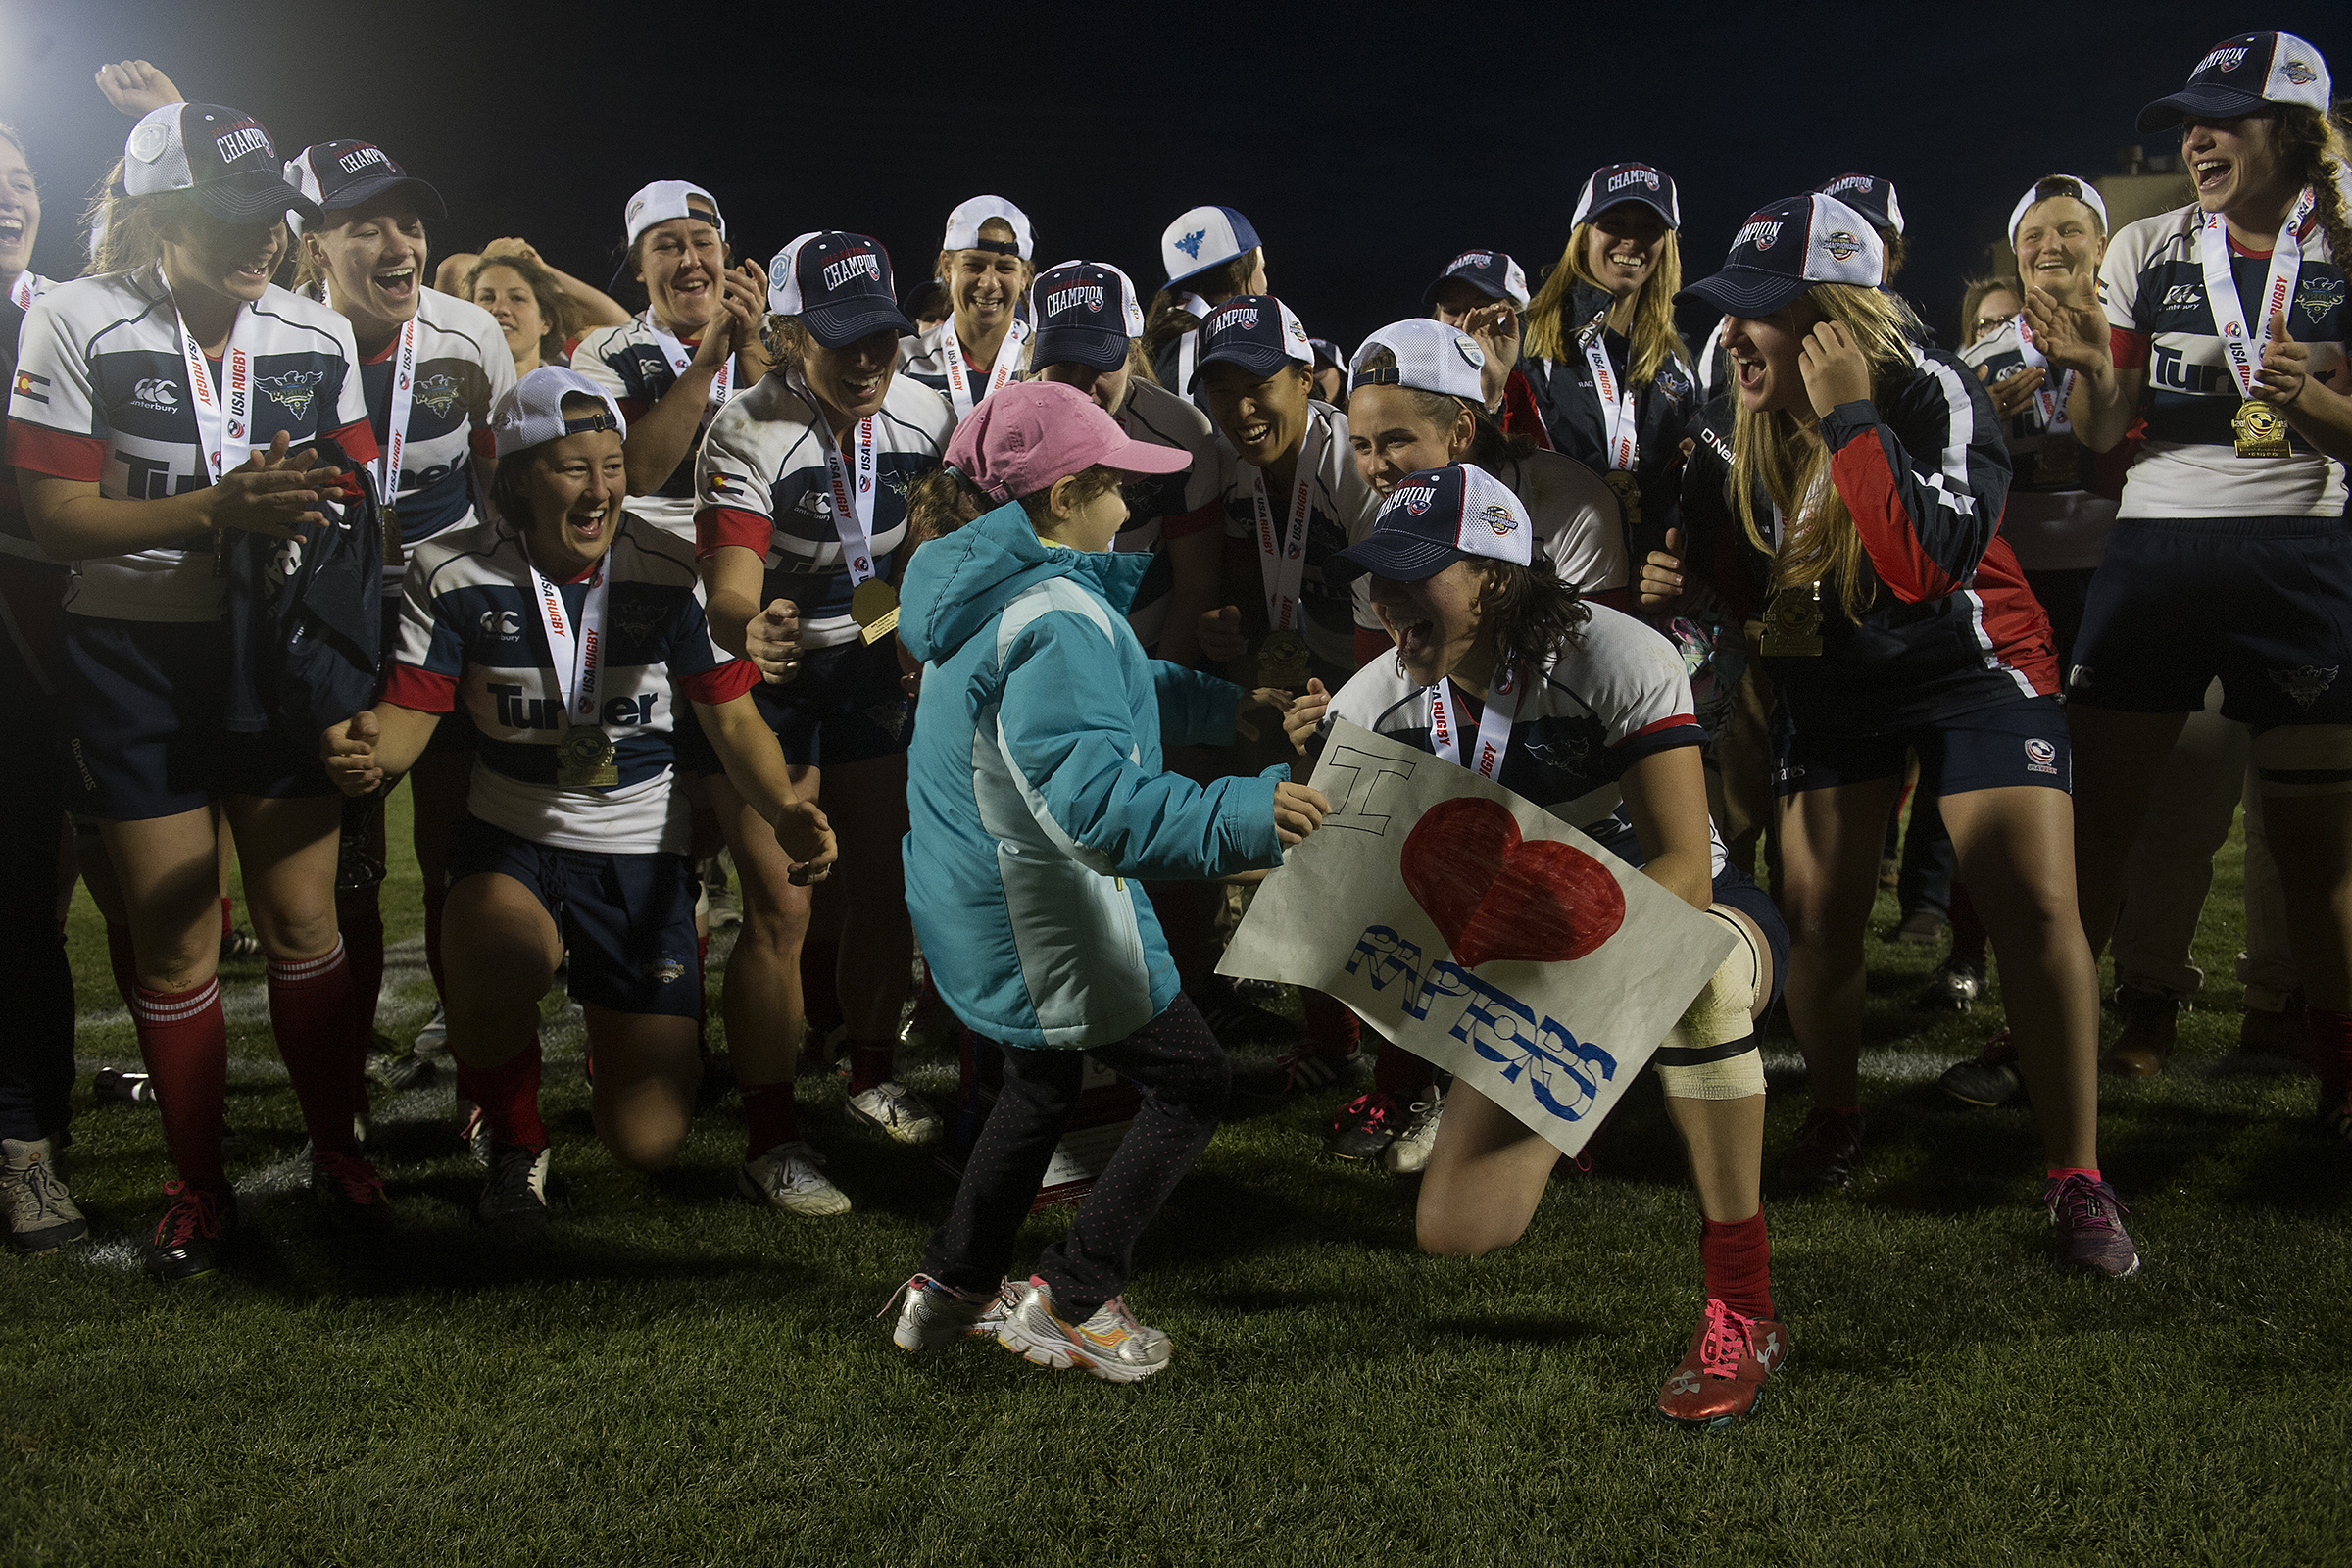 GLENDALE, CO - NOVEMBER 15: Lady Raptors vs New York Rugby Club during the semi-finals at Infinity Park in Glendale, Colorado on November 15, 2015. (Photo by Seth McConnell)